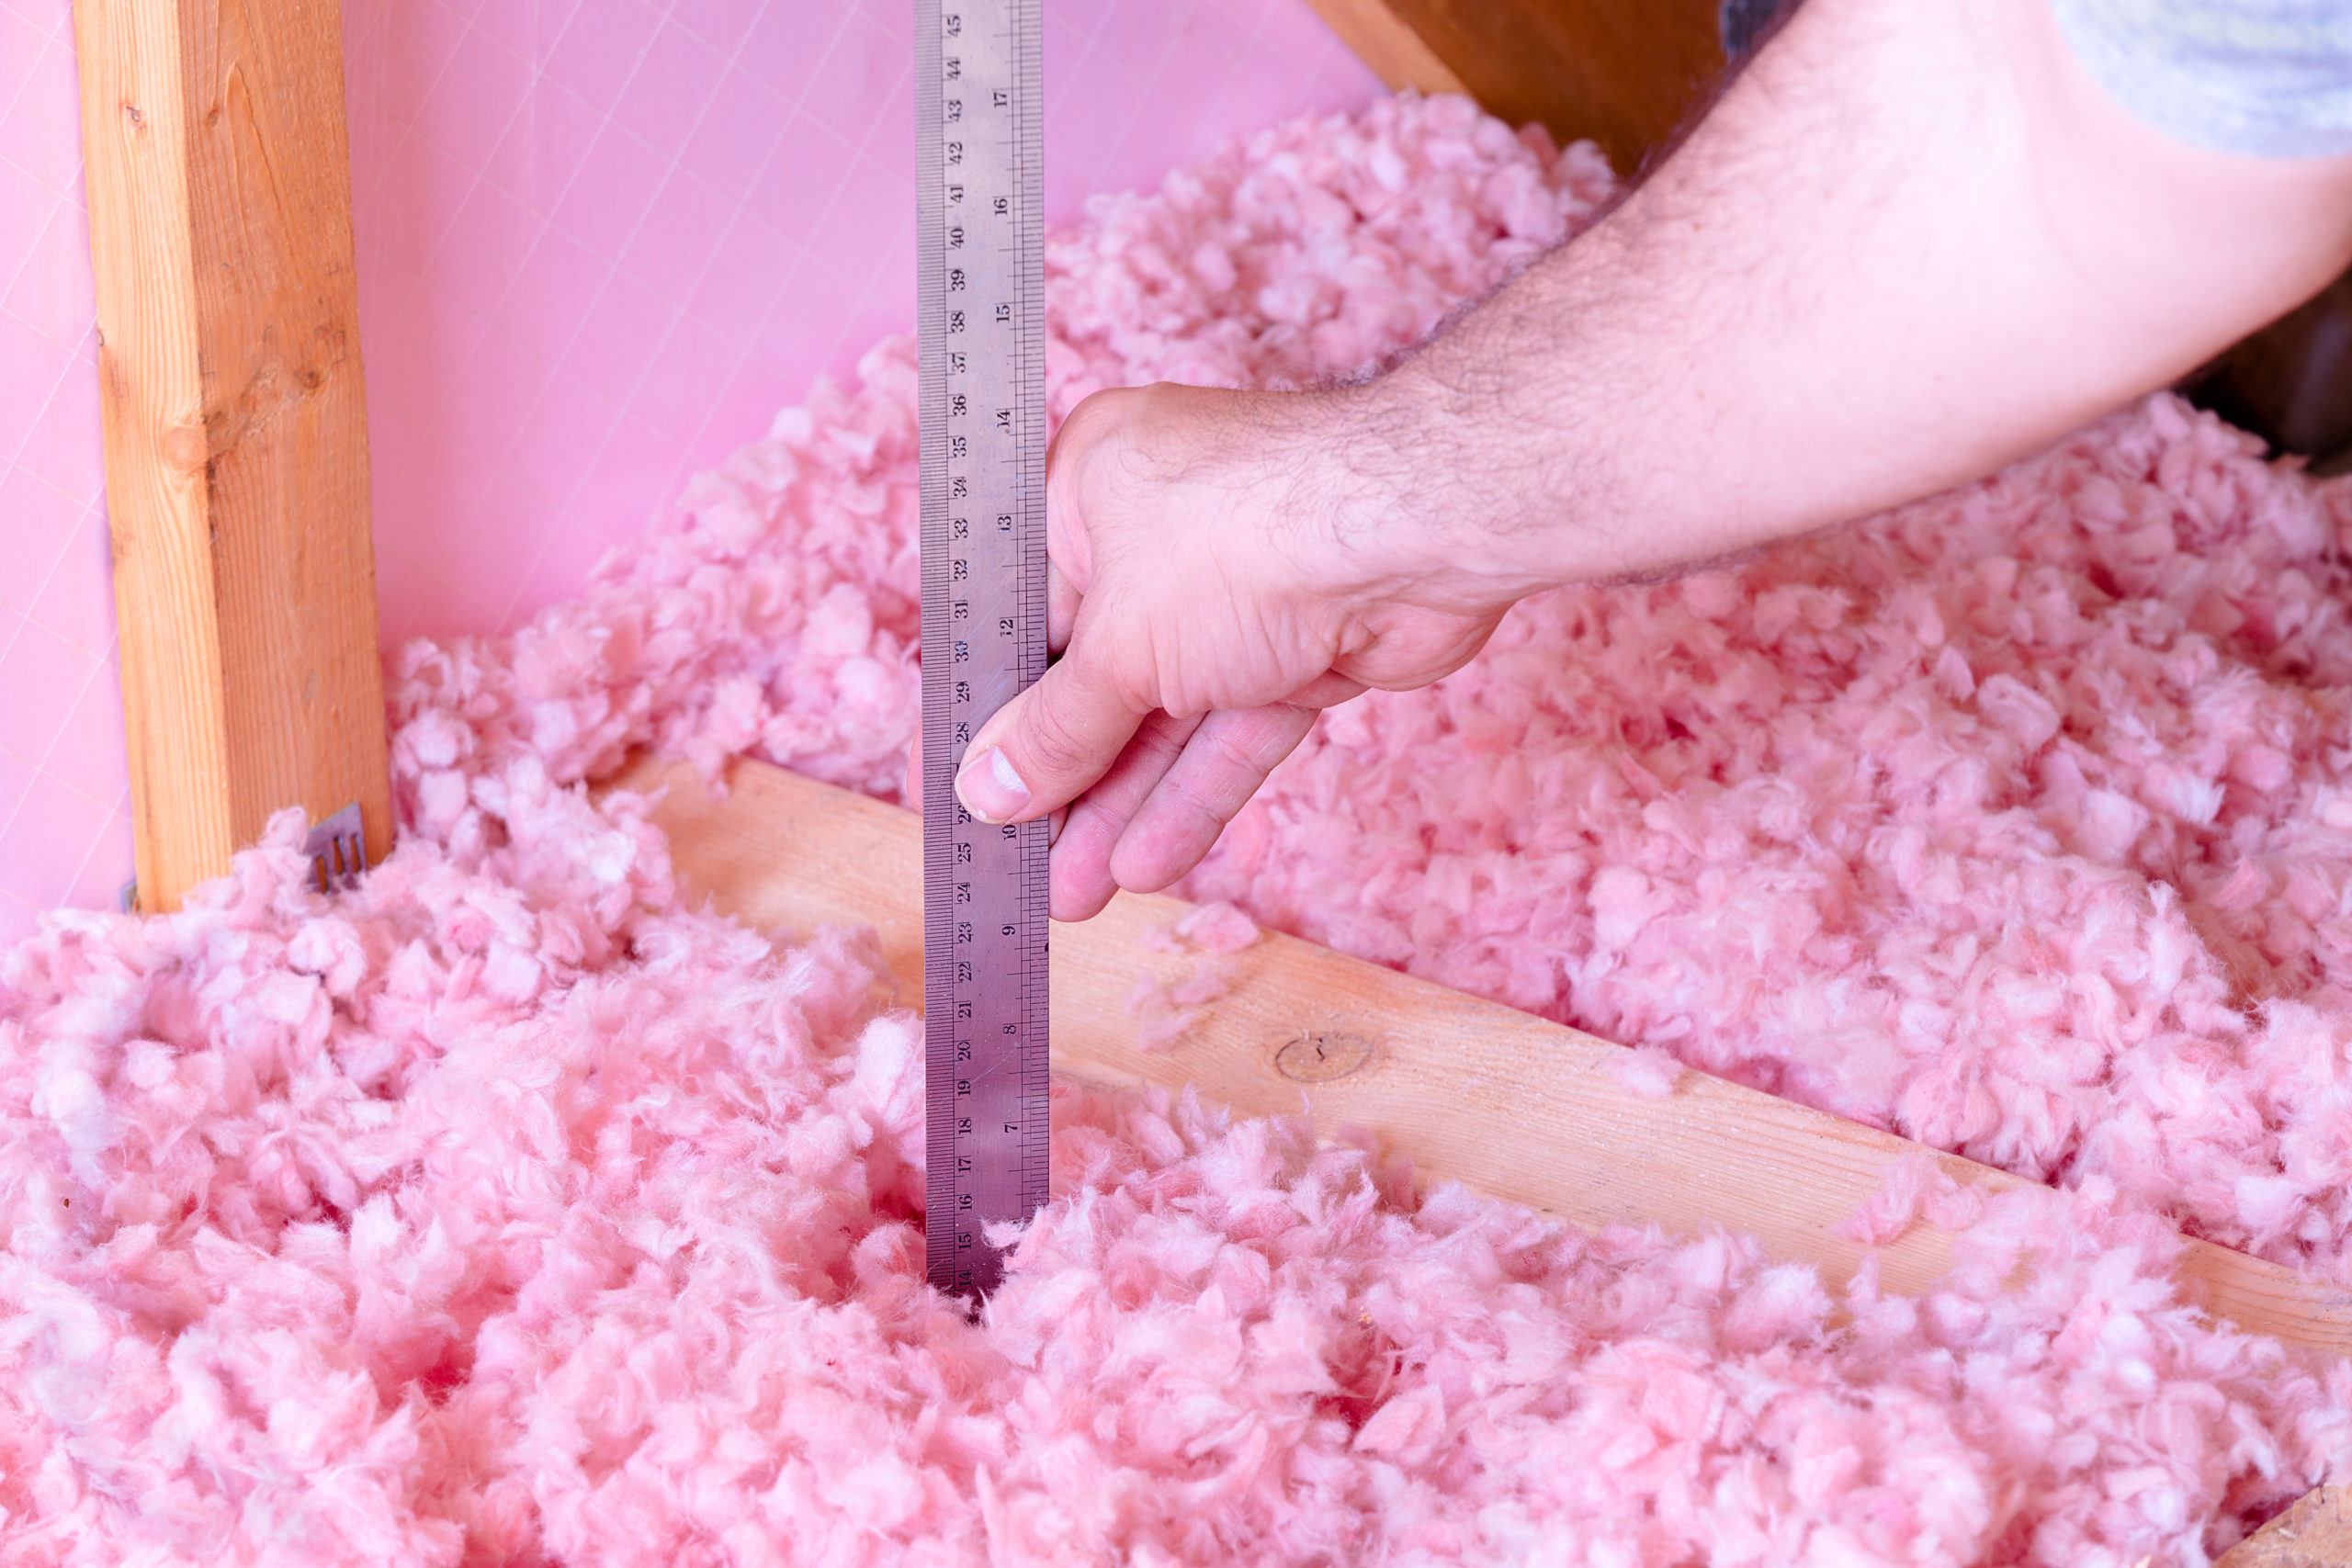 Benefits of Fiberglass Insulation in Your Home